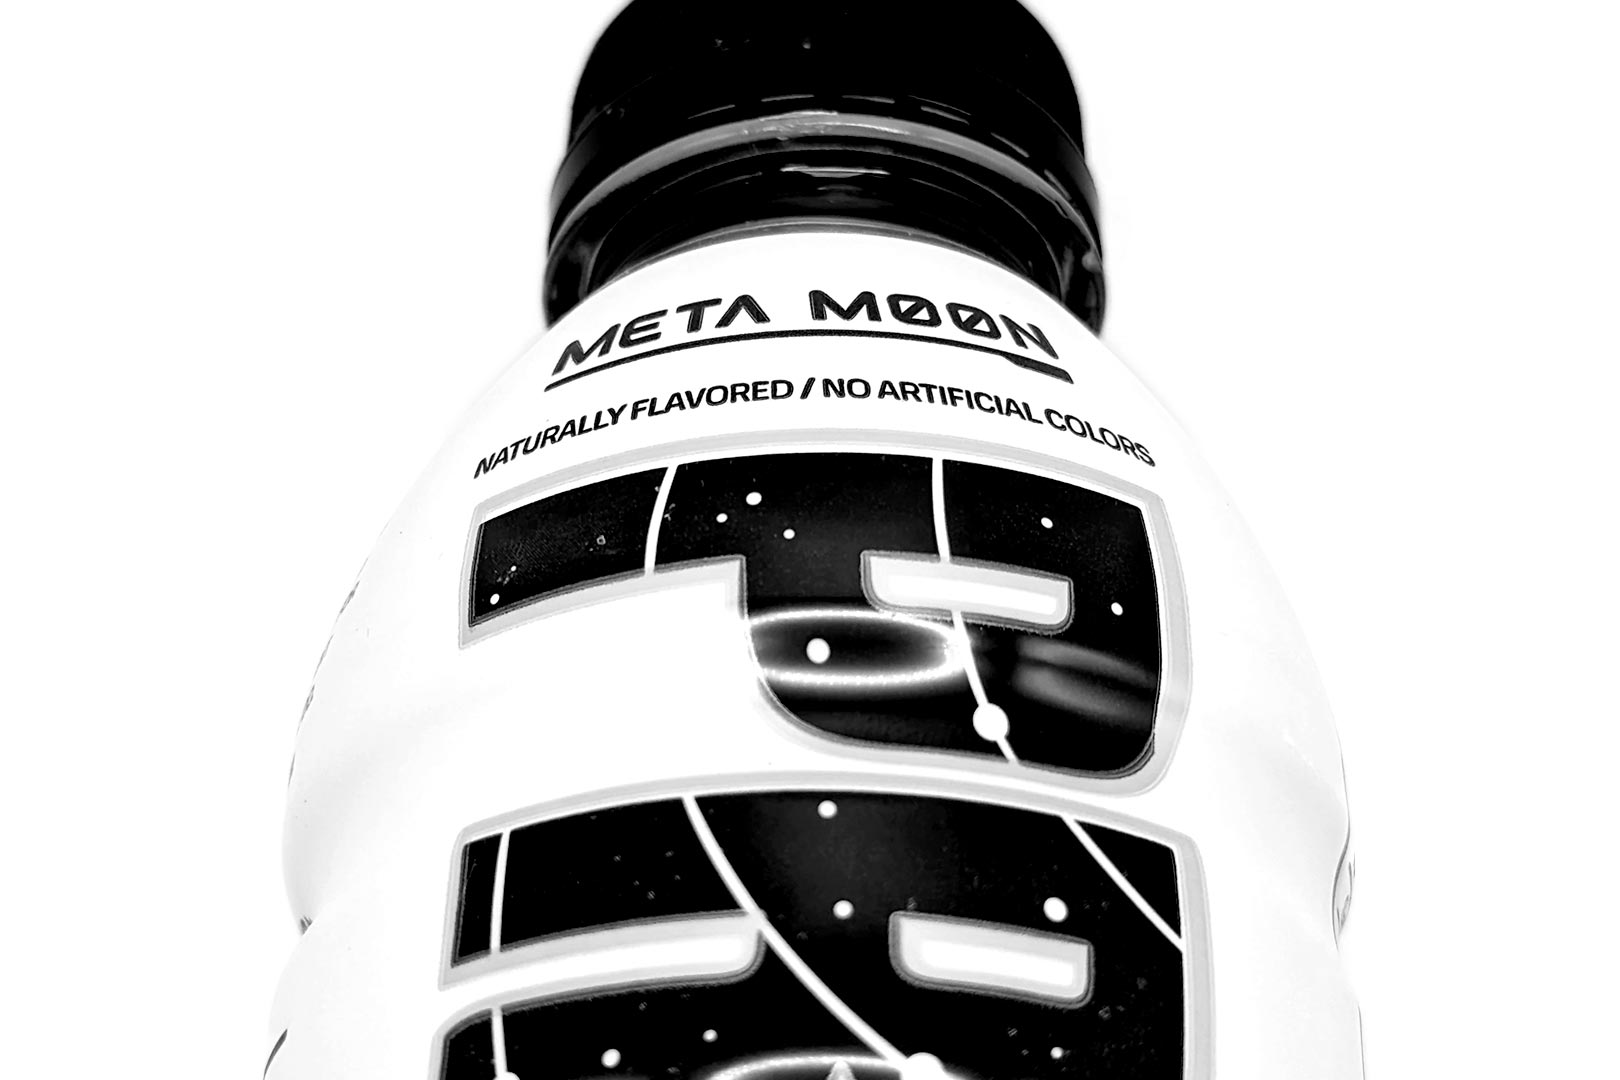 Meta Moon Prime Hydration Review